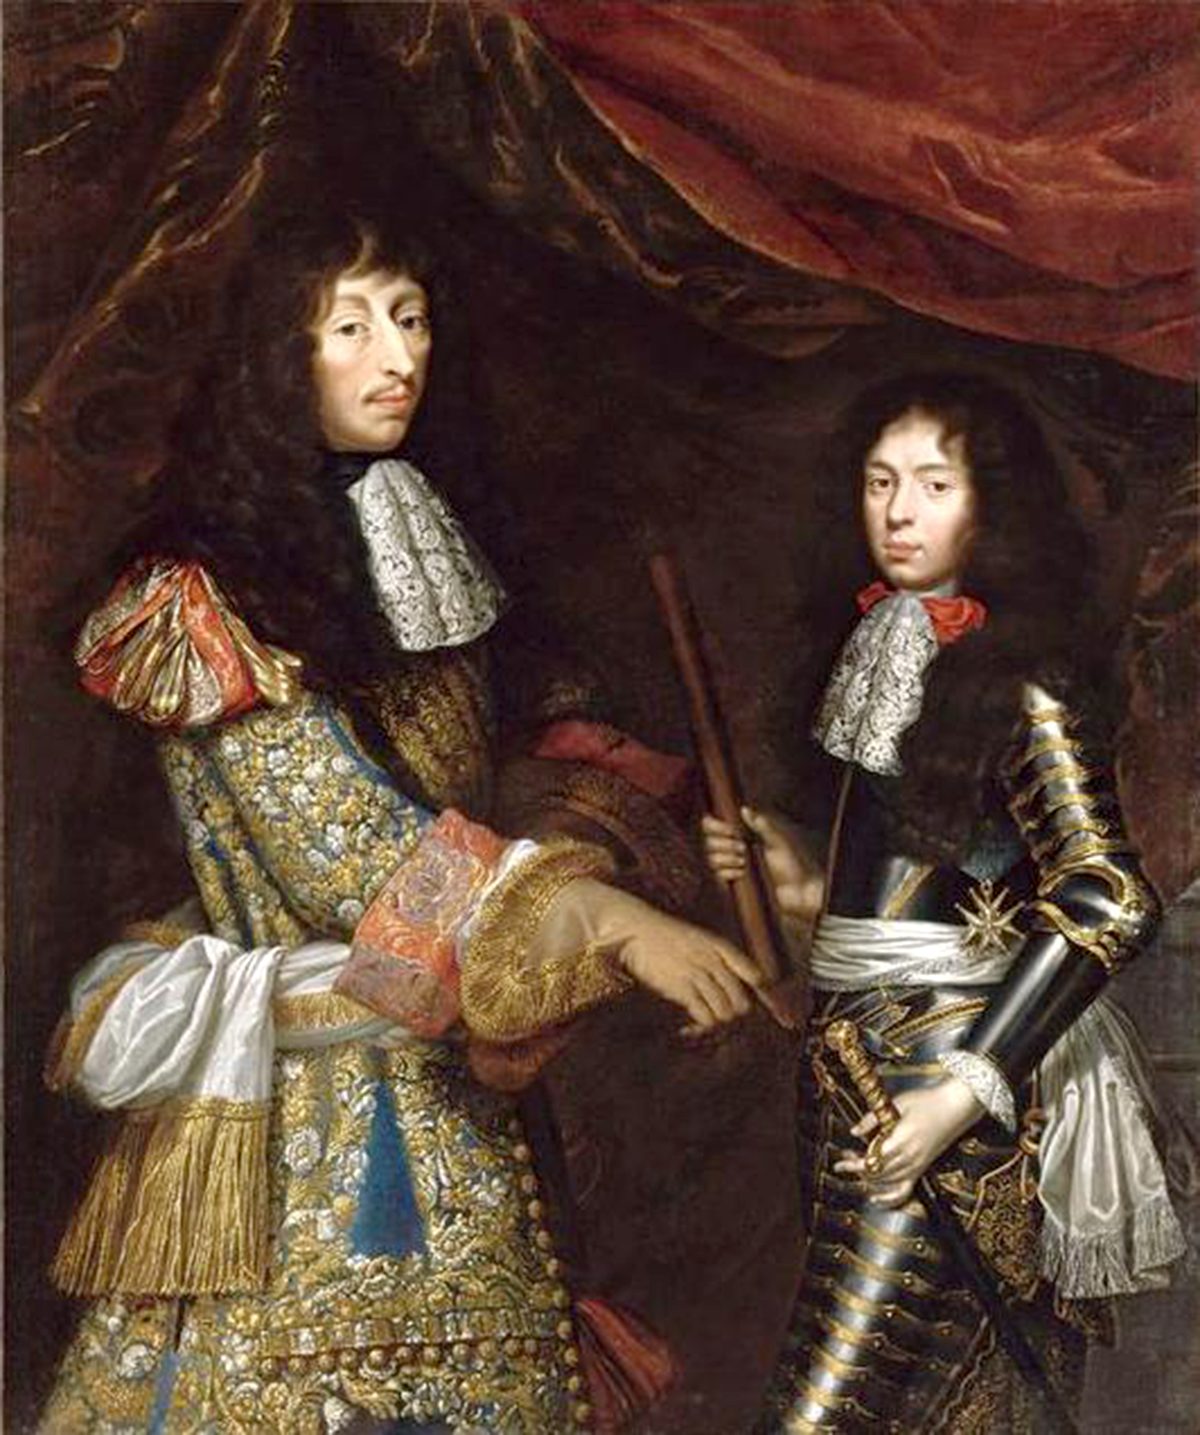 A portrait of Louis II de Bourbon Condé and his son Henri-Jules, they are wearing clothing with gold elements.